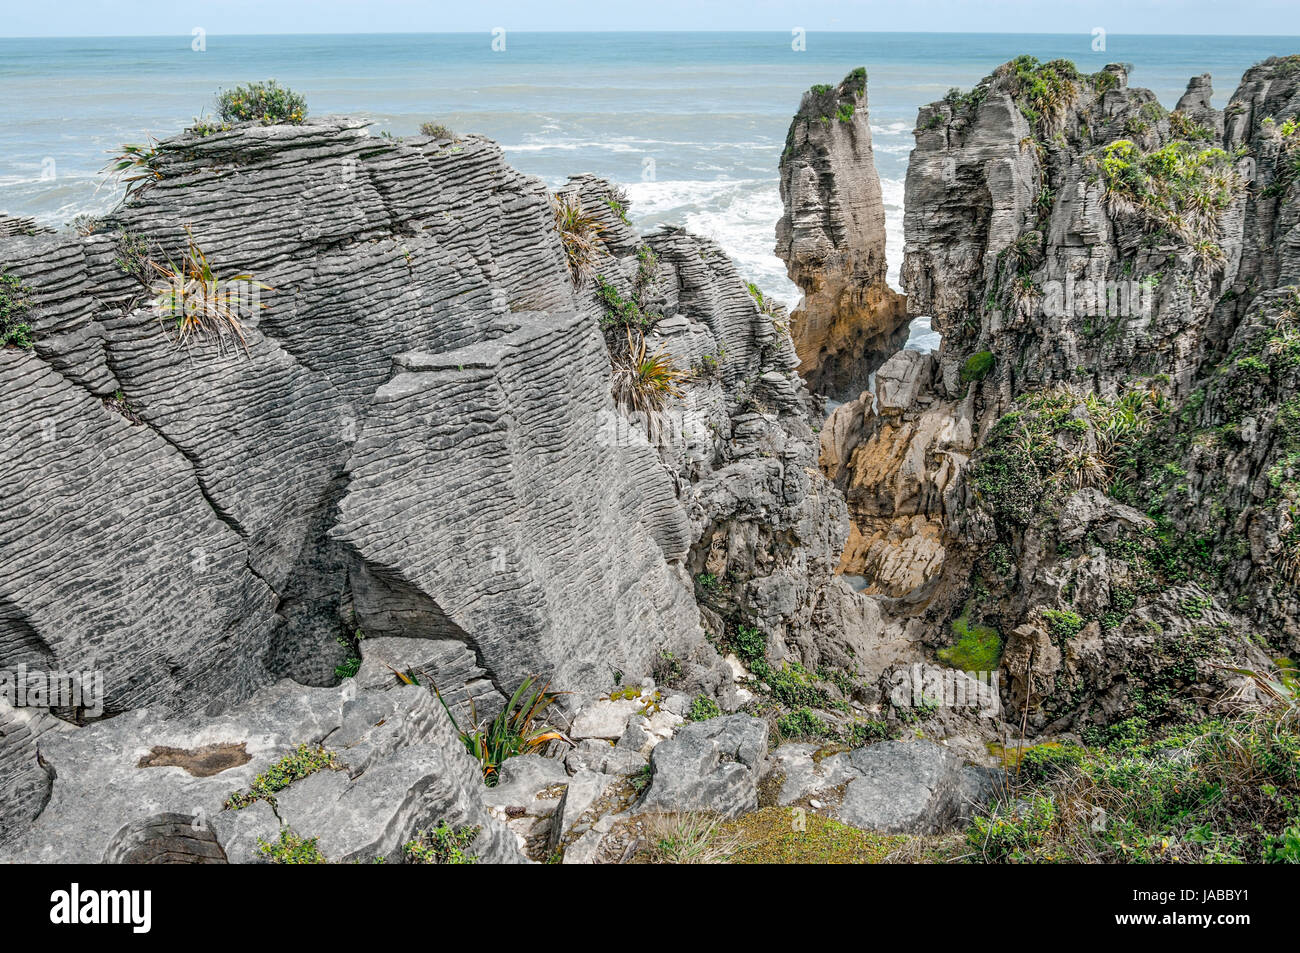 New Zealand Coastal Rocks:  Patterns of sedimentation and erosion show in finely detailed “pancake” rock formations on the west coast of New Zealand. Stock Photo